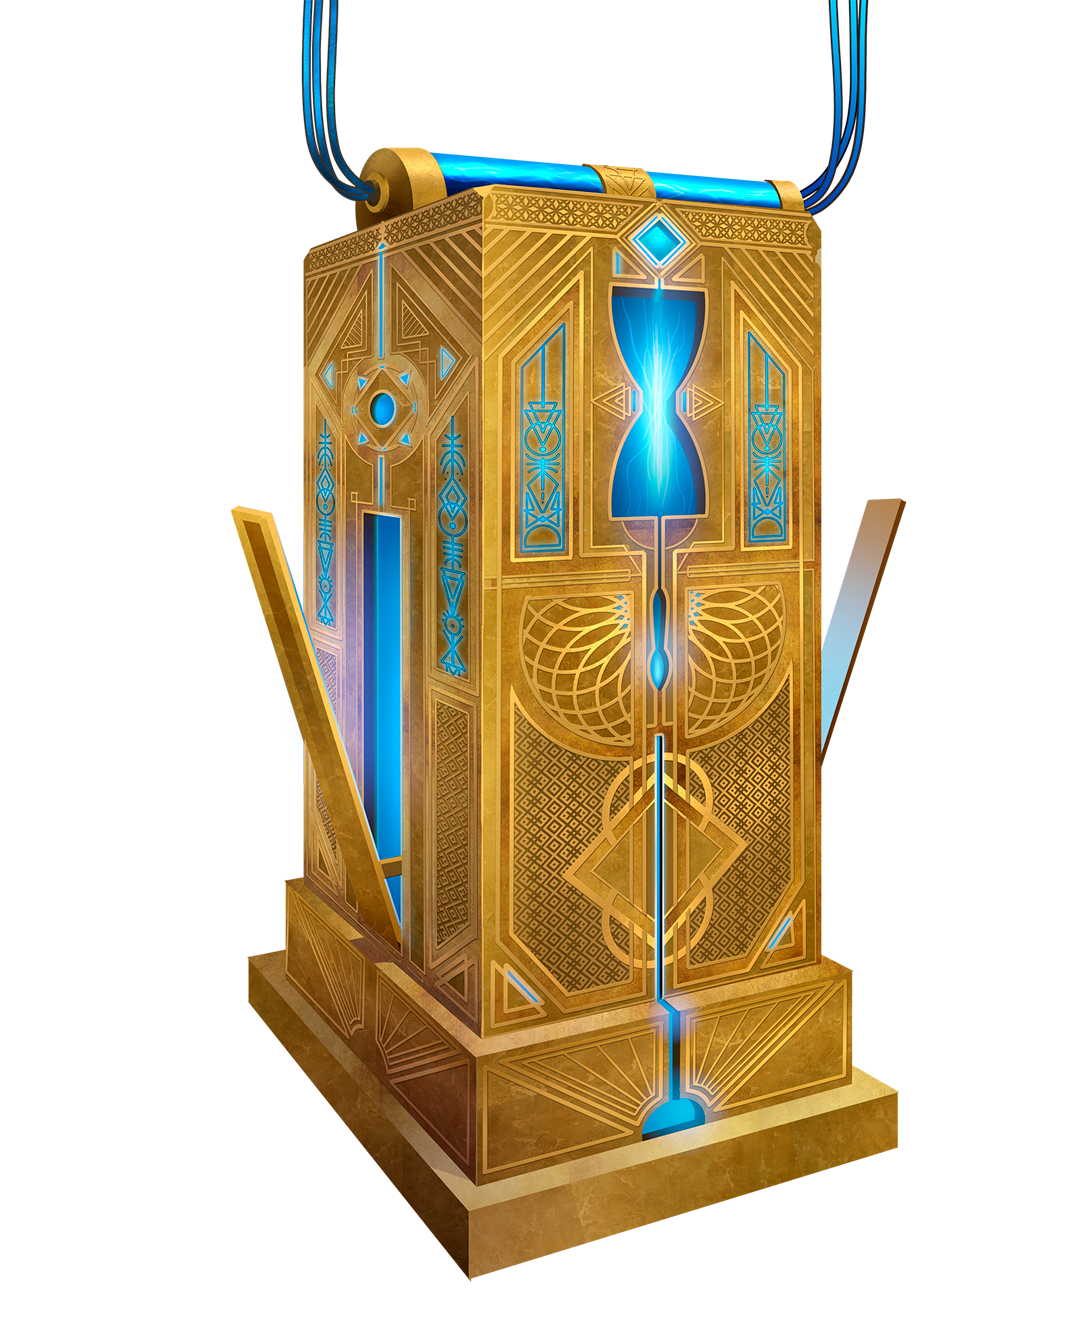 Illustration of a tall rectangular golden box with blue glowing accents and symbols inlaid in the surface